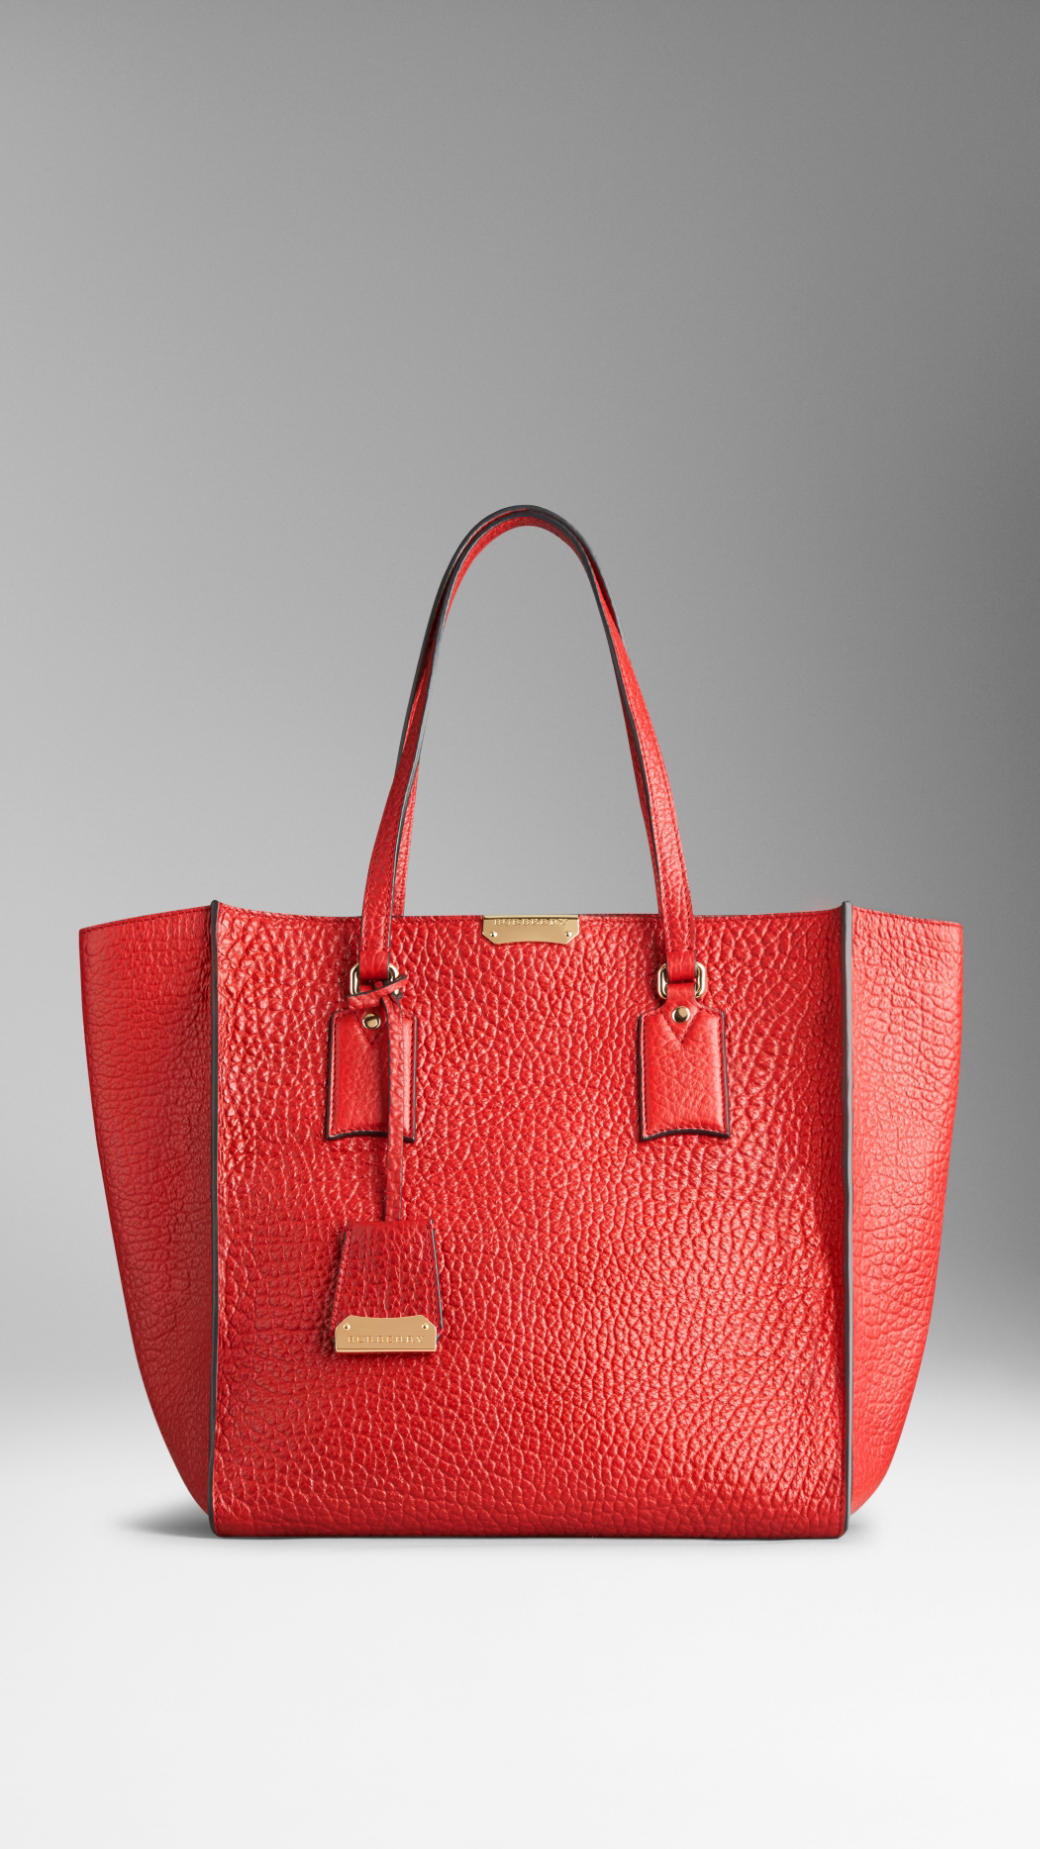 Burberry Medium Signature Grain Leather Tote Bag in Red (military red) | Lyst